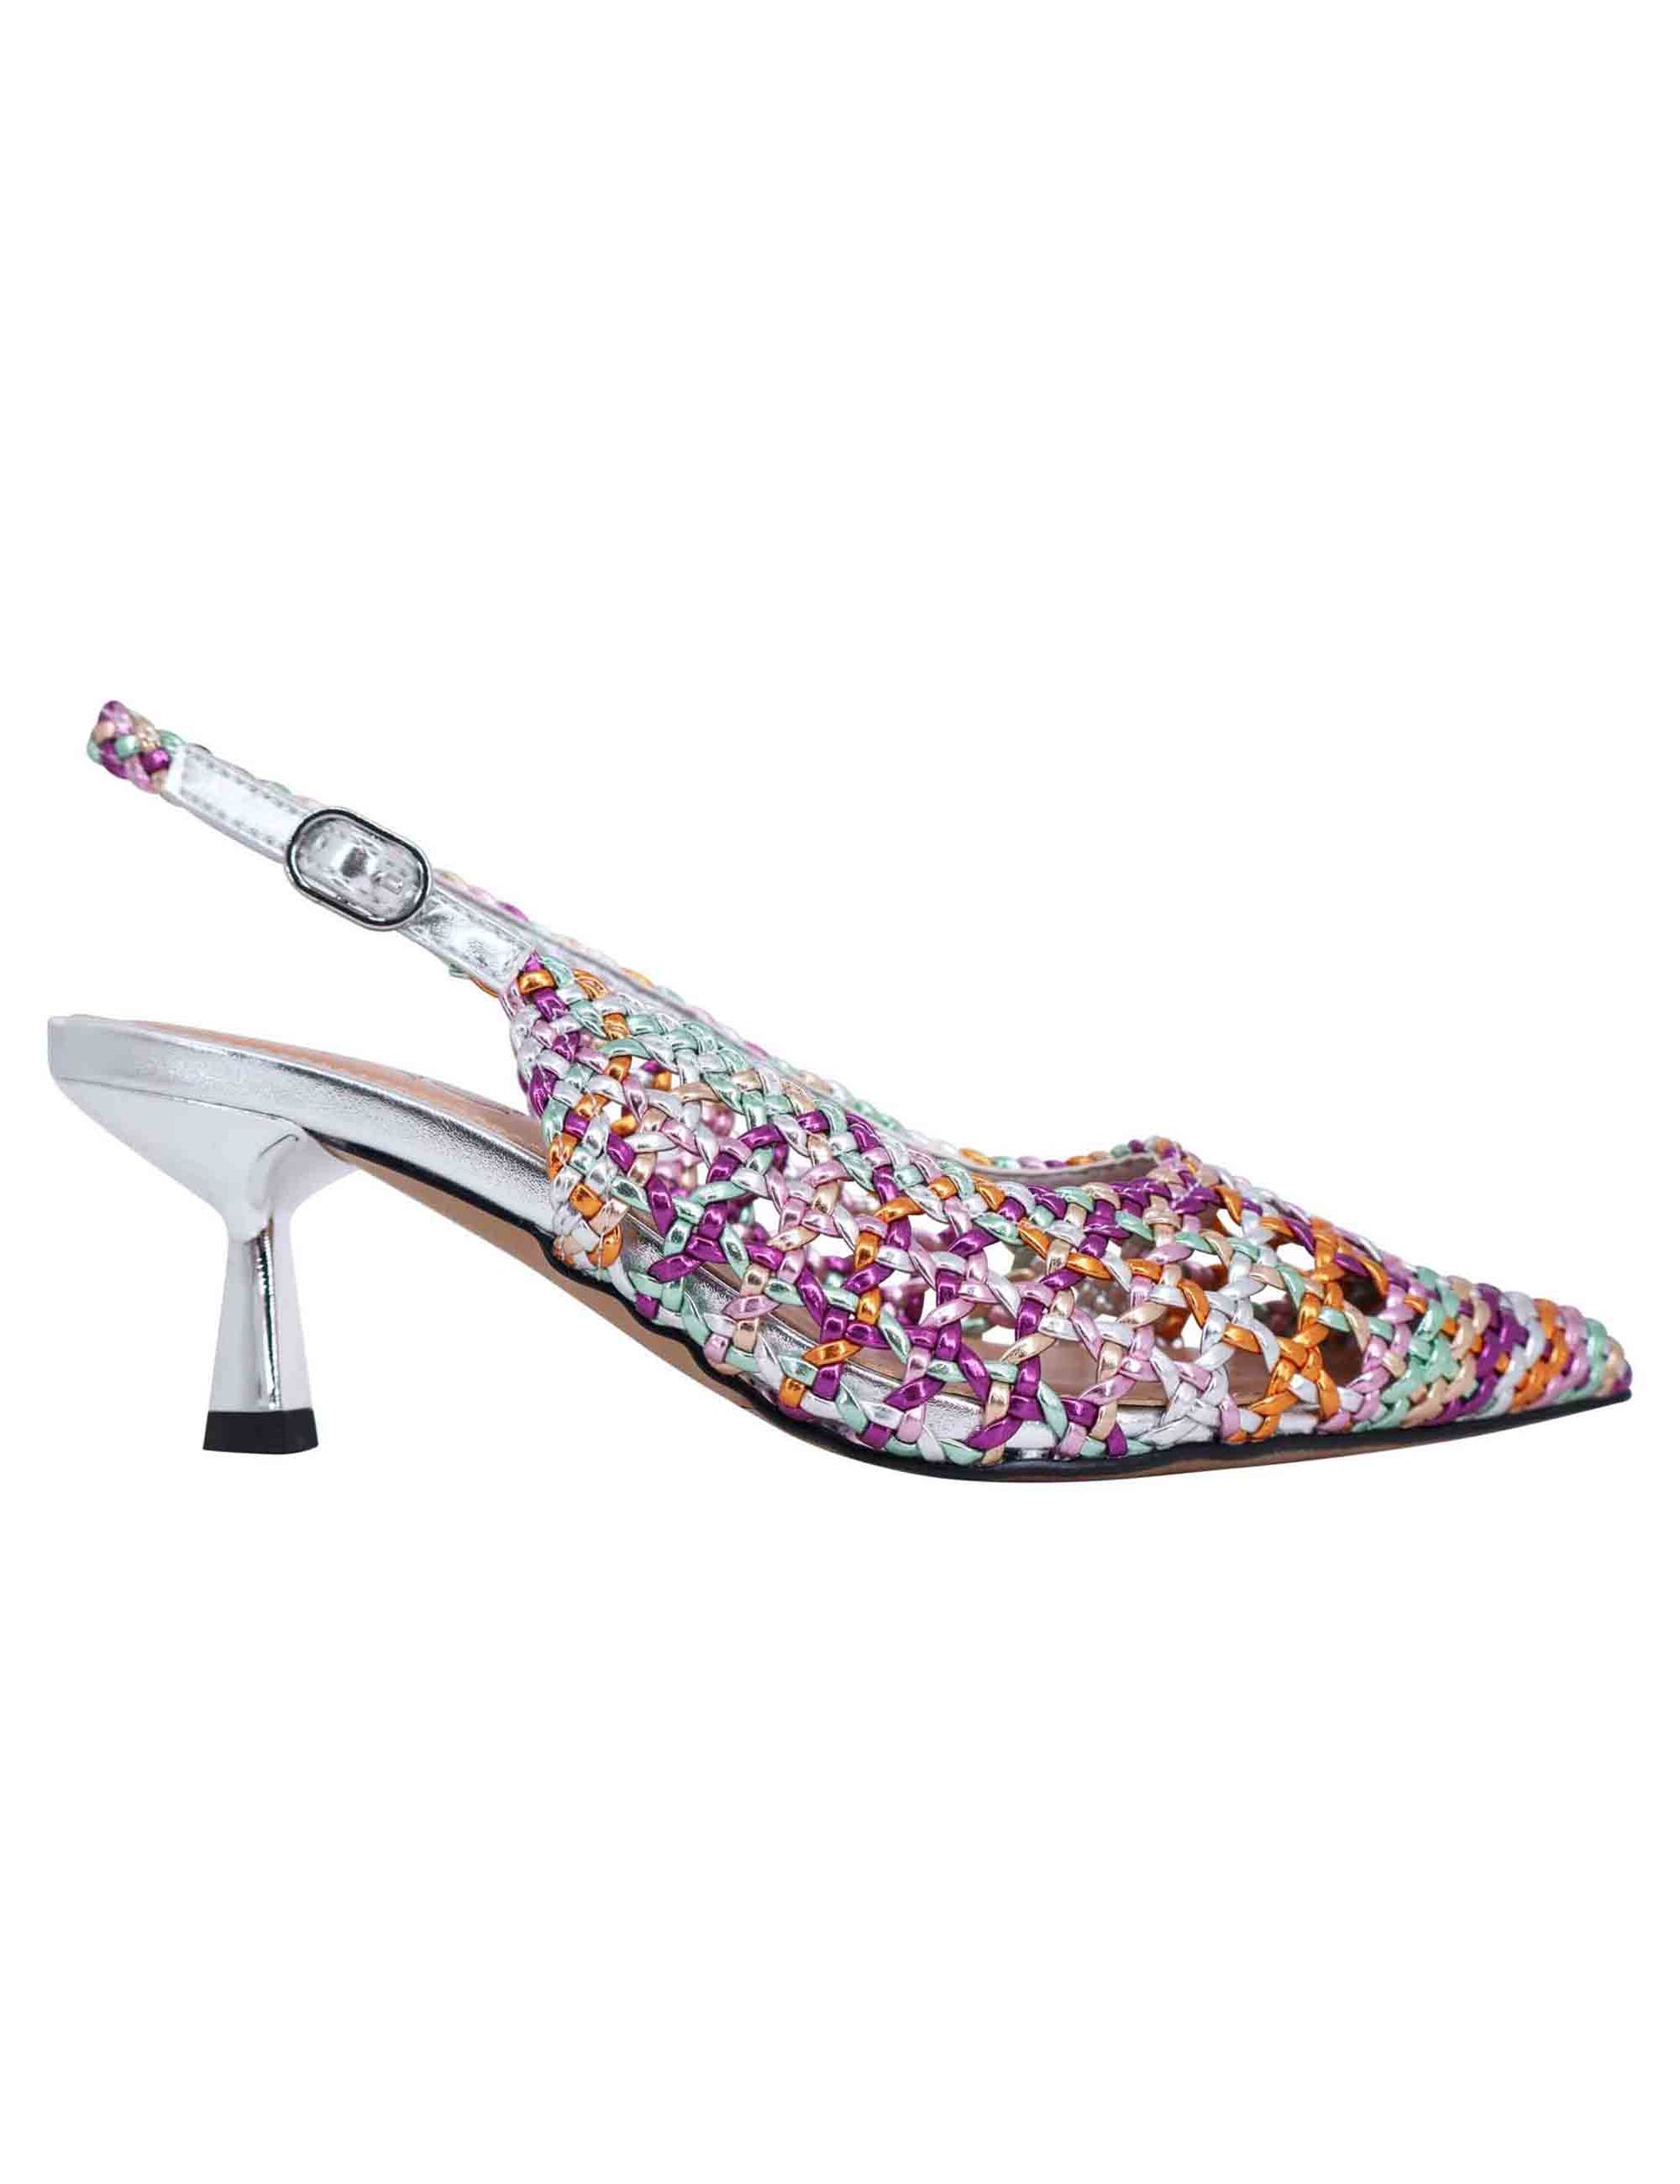 Women's slingback pumps in multicolored fuchsia laminated eco leather with silver heel